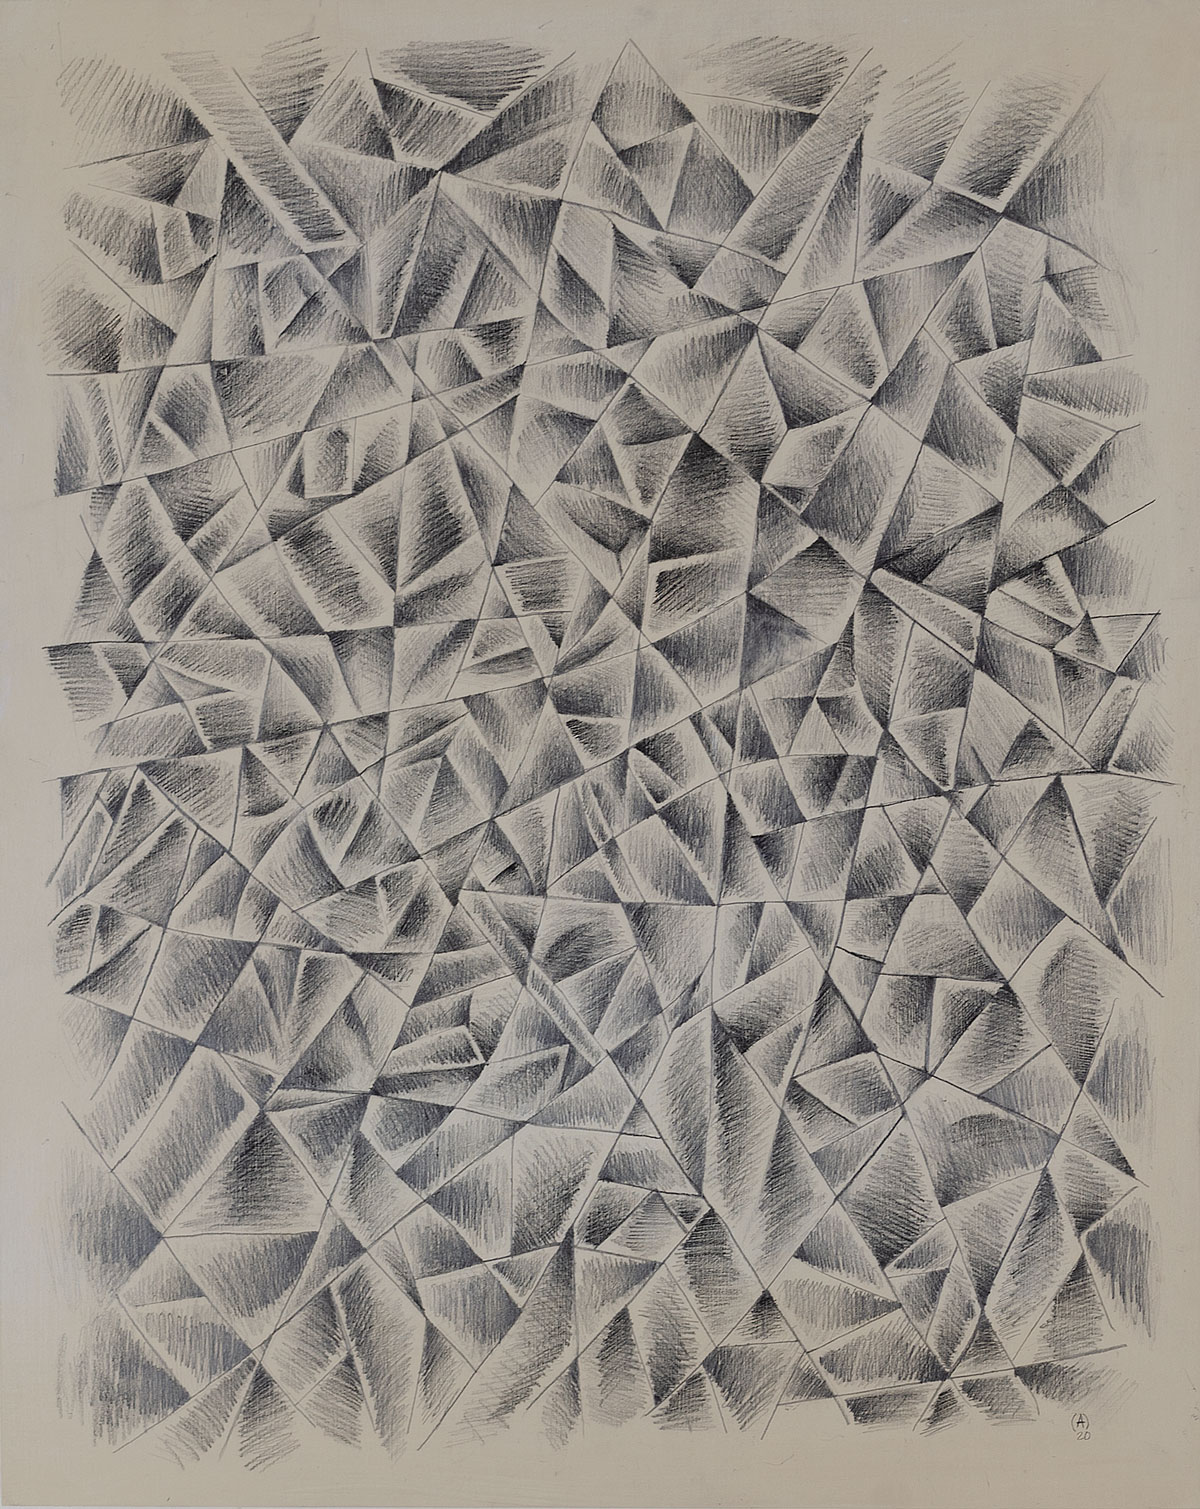 Graphite drawing of shaded triangular shapes in gray against a white backdrop